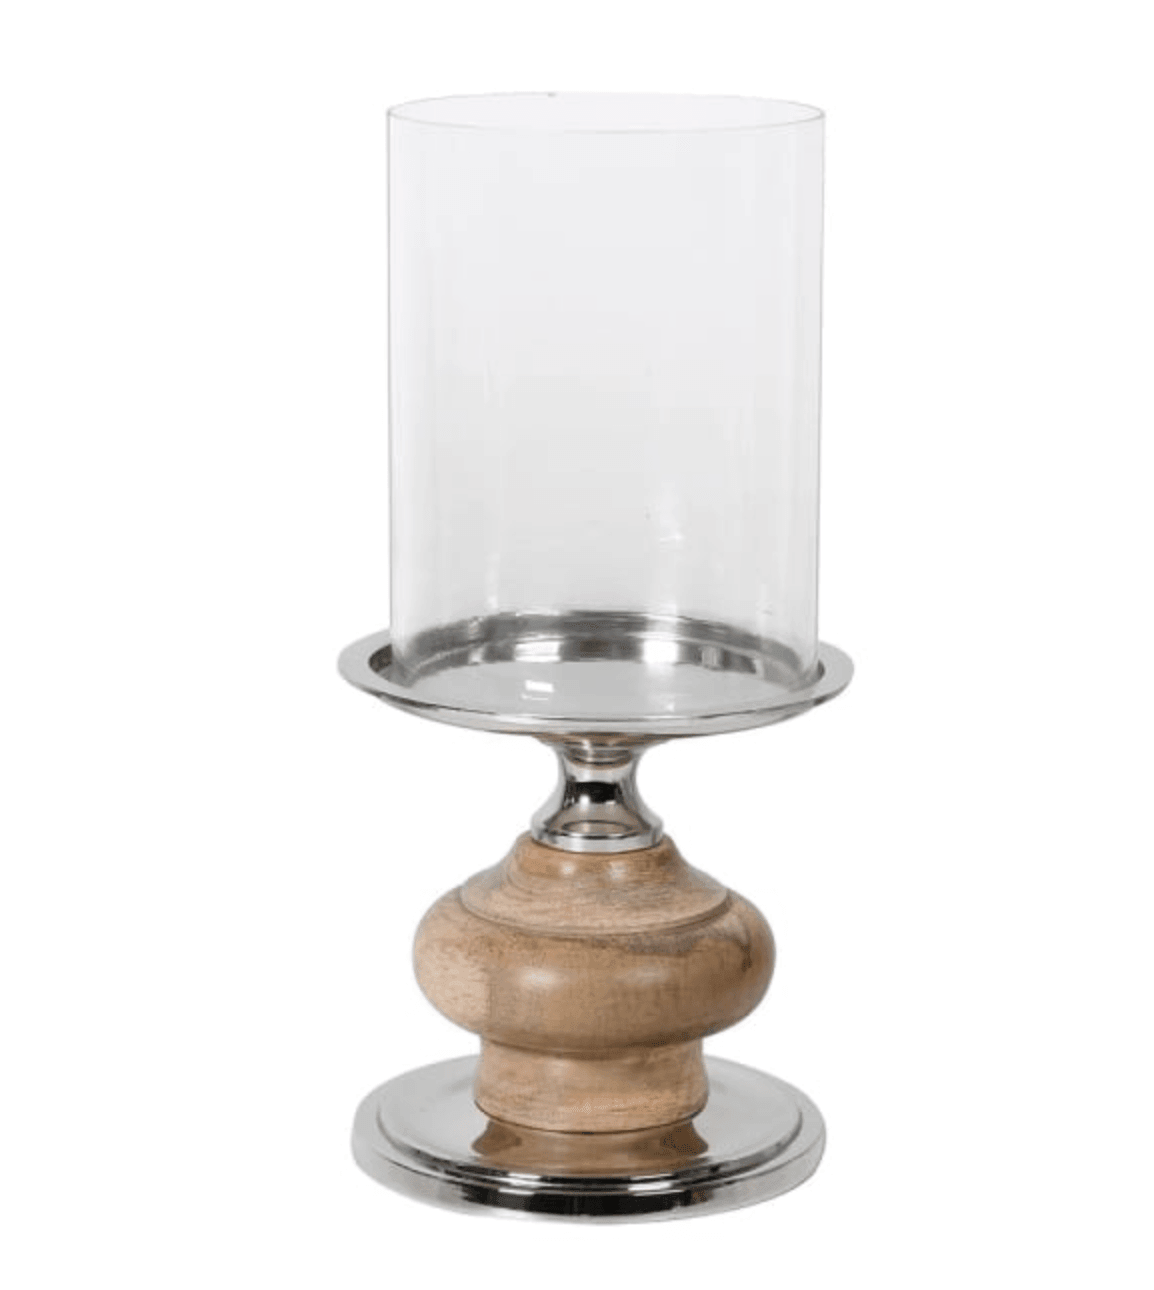 Home Wood and Nickel Candle Holder with glass.